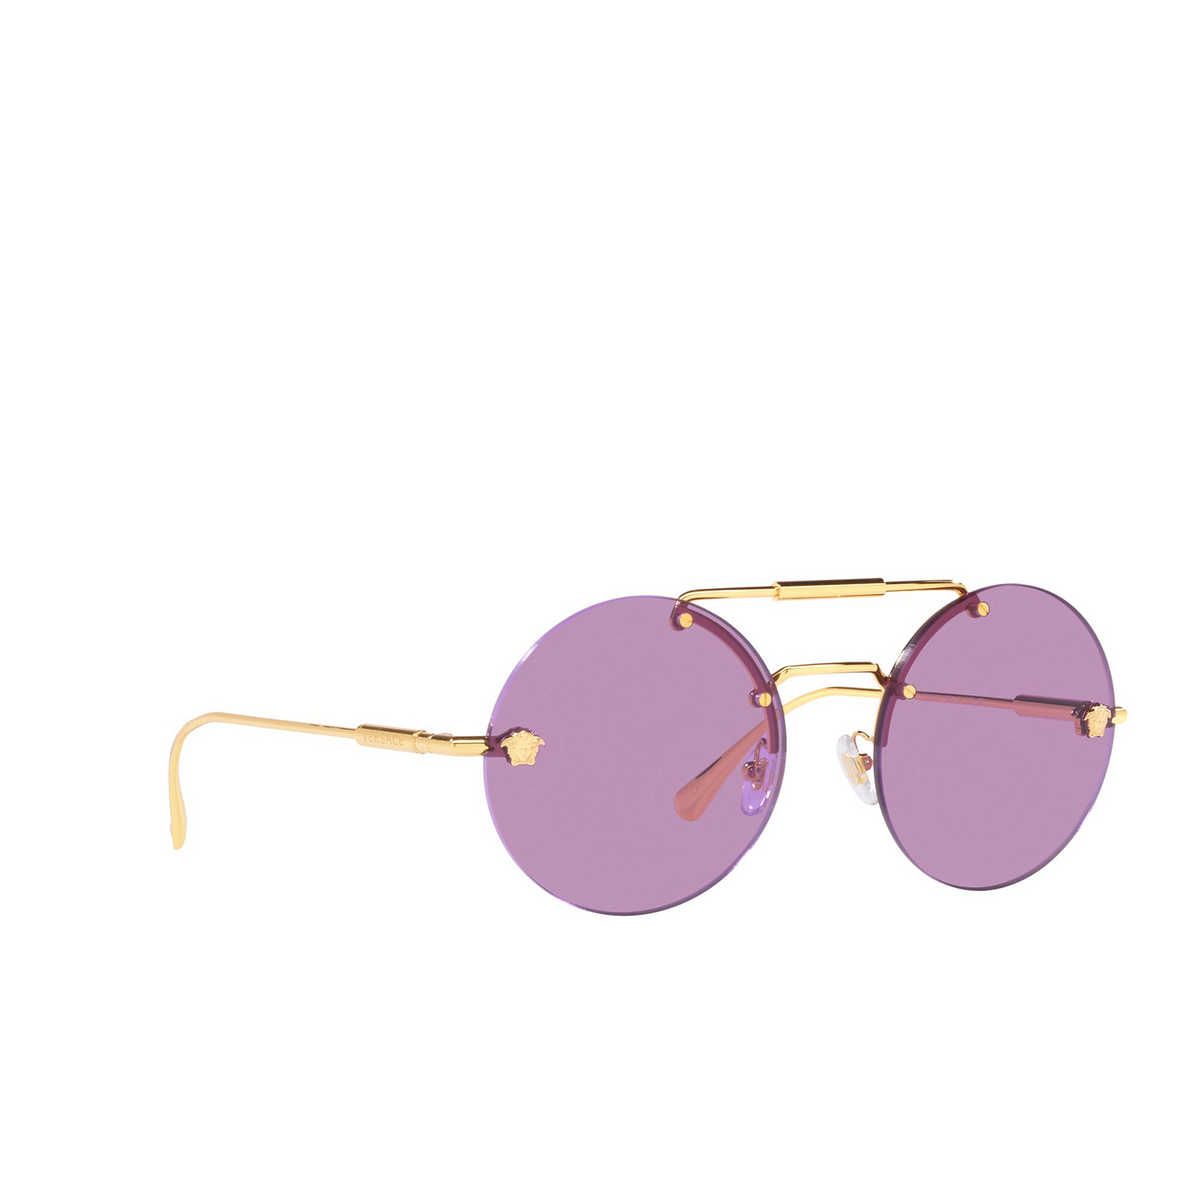 Versace® Round Sunglasses: VE2244 color Gold 100269 - three-quarters view.